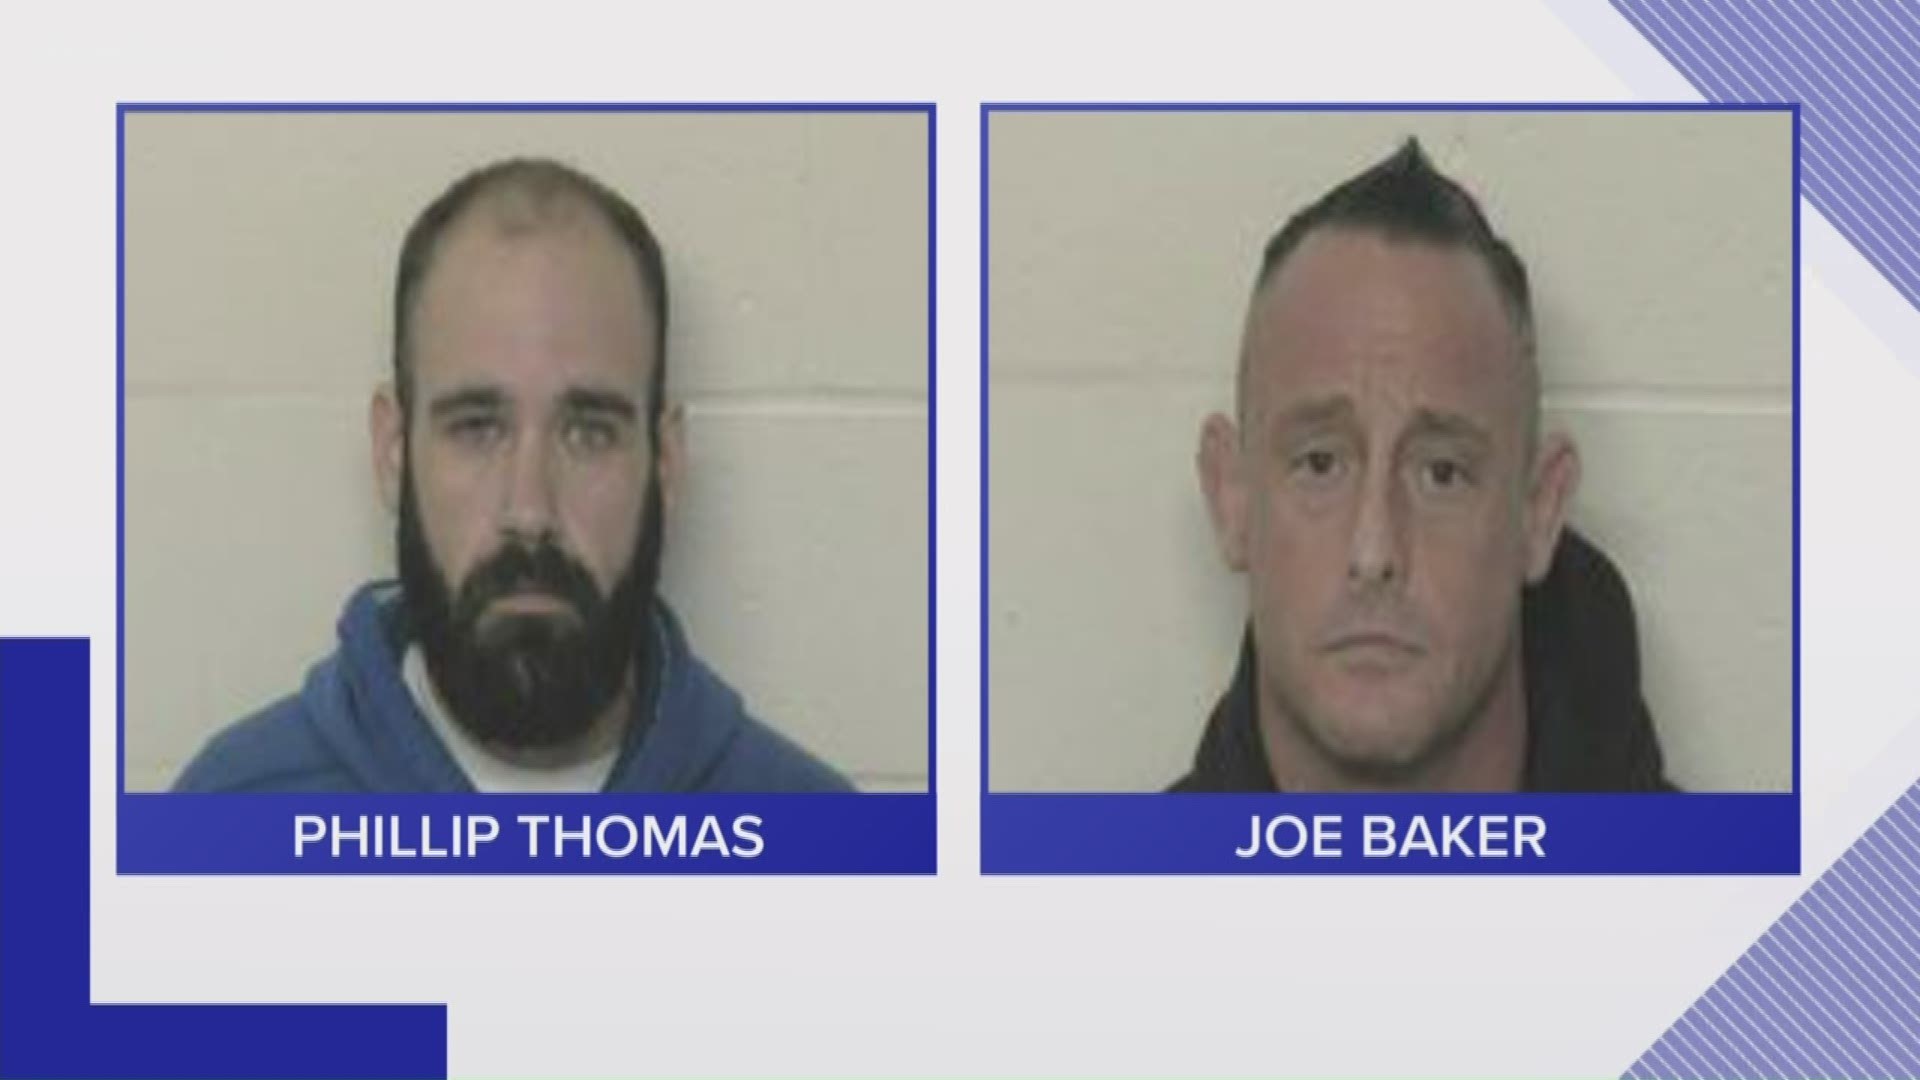 After they were accused of allegedly possessing and distributing an illegal steroid, a Scott County sheriff's deputy and reserve officer are out on bond.